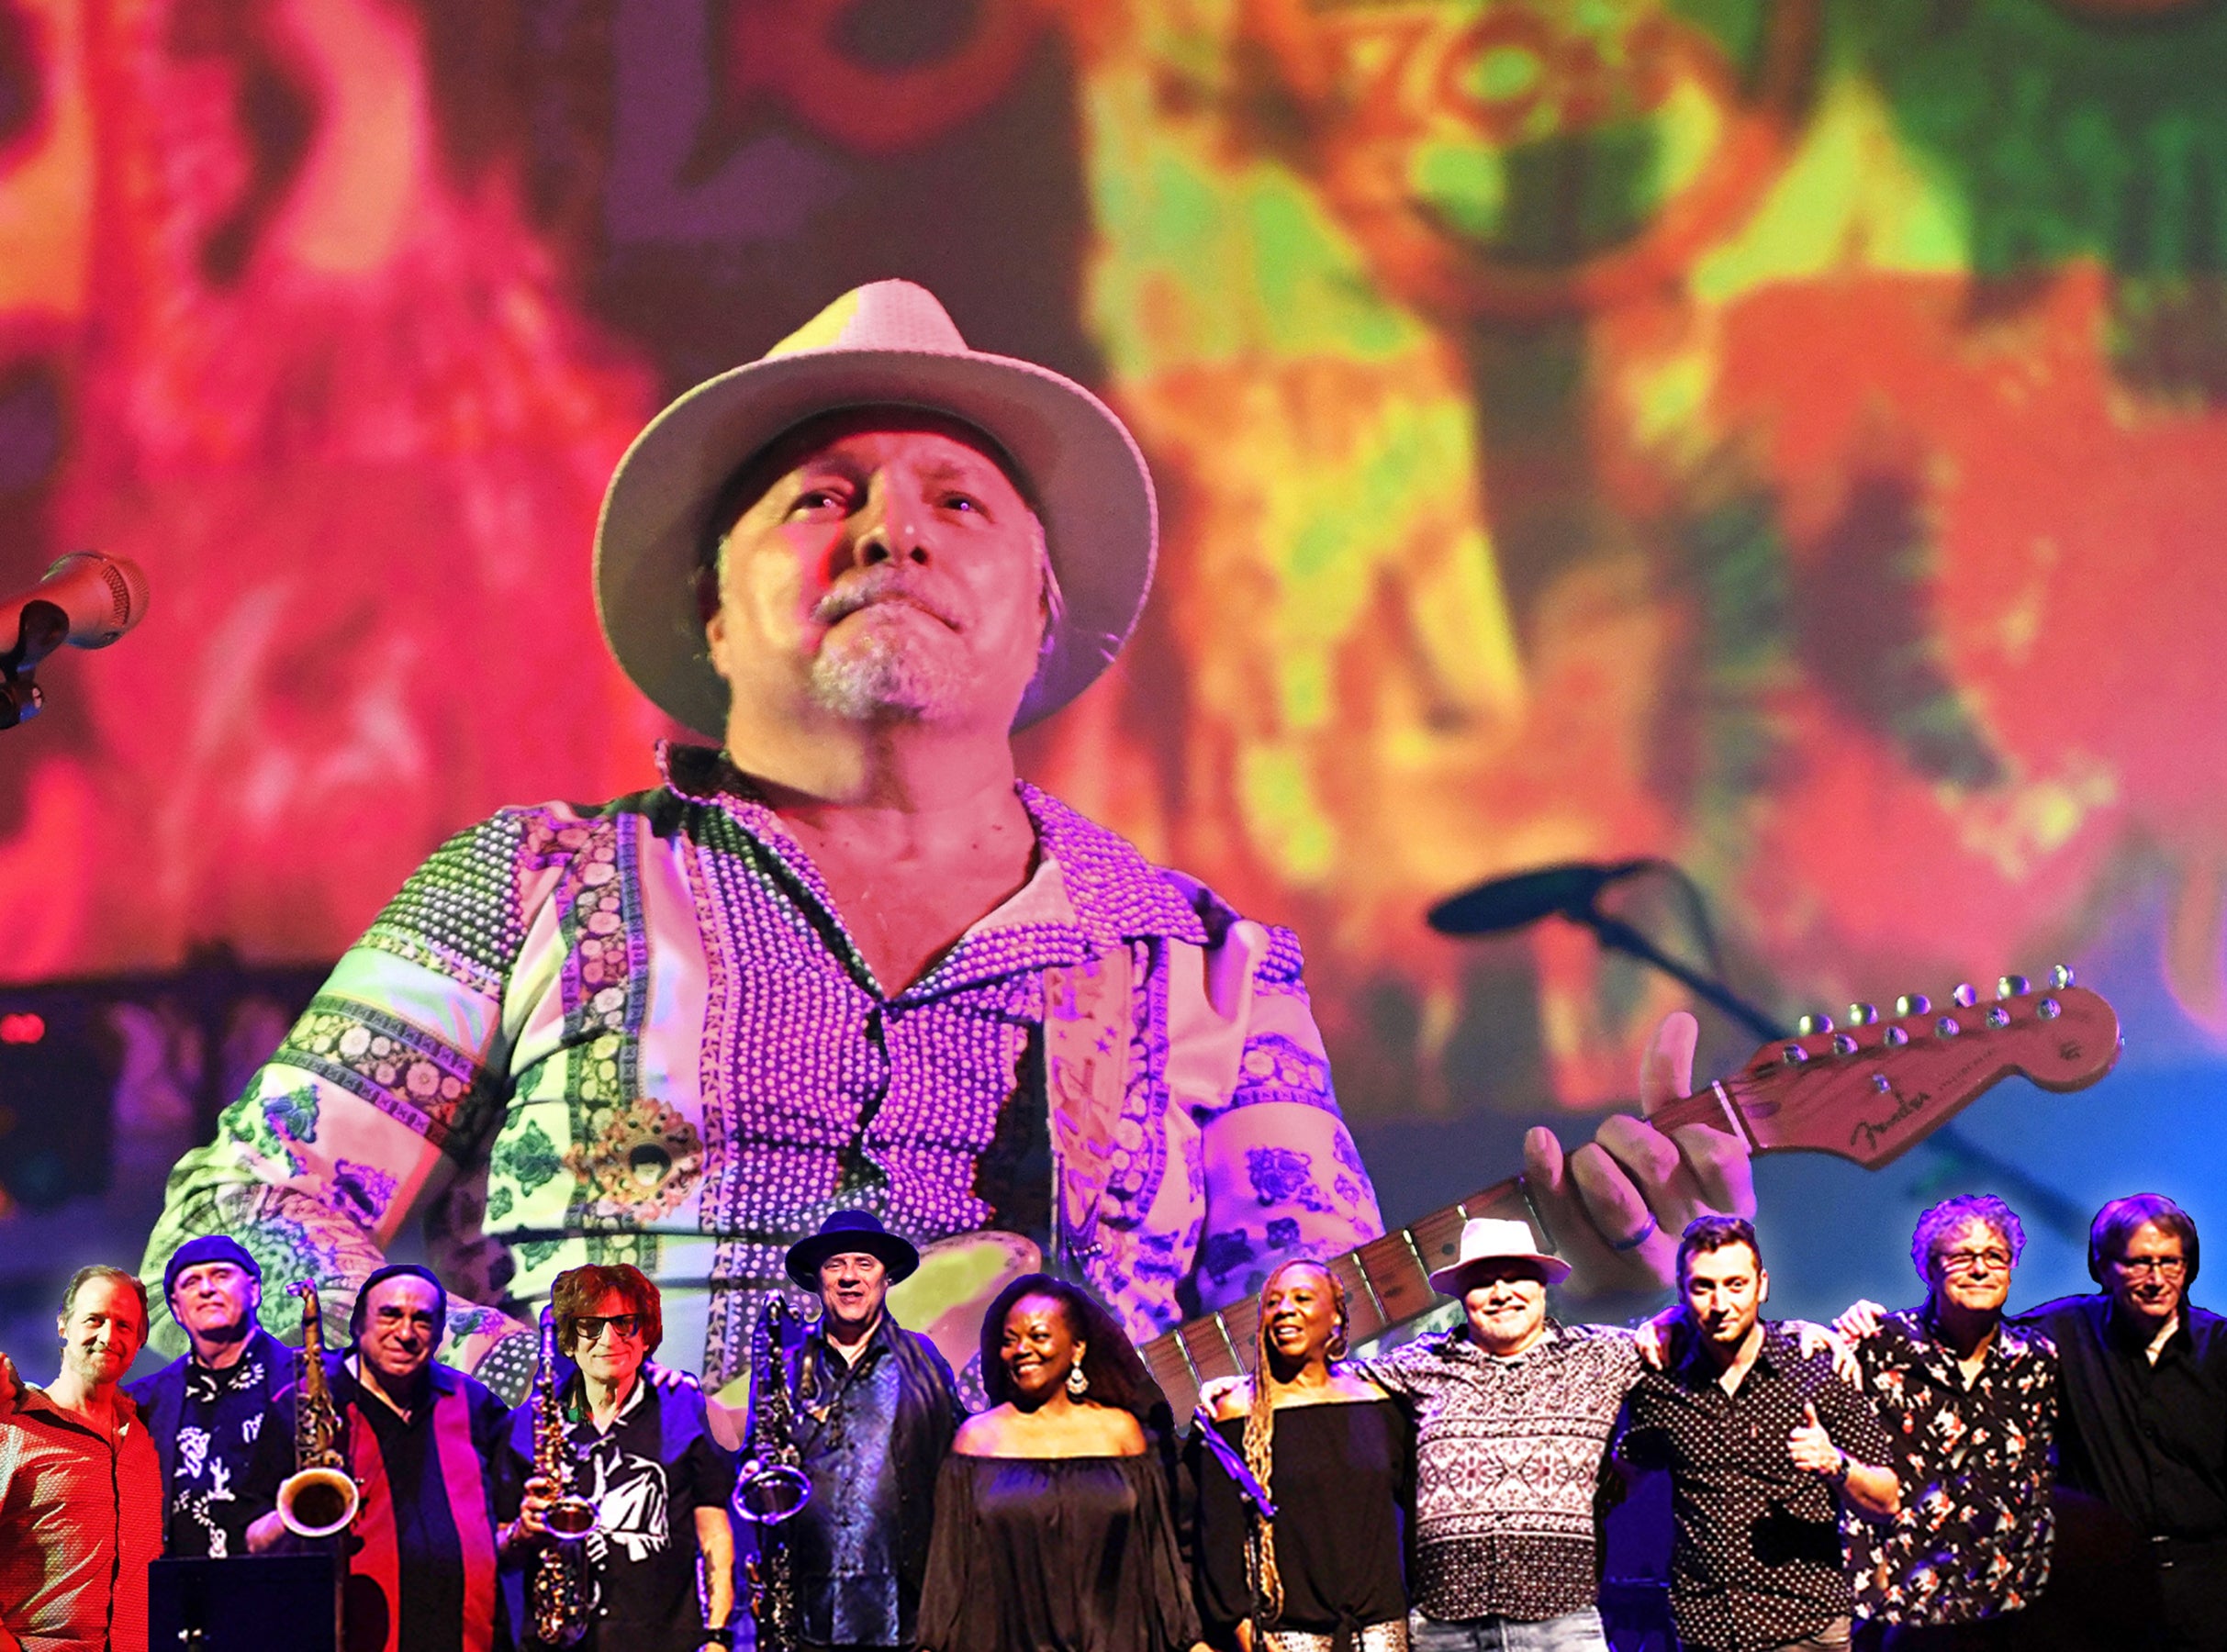 The Best Of The 70s w/ DizzyFish, The Uptown Horns & Jeff Pitchell in Wallingford promo photo for Citi® Cardmember presale offer code